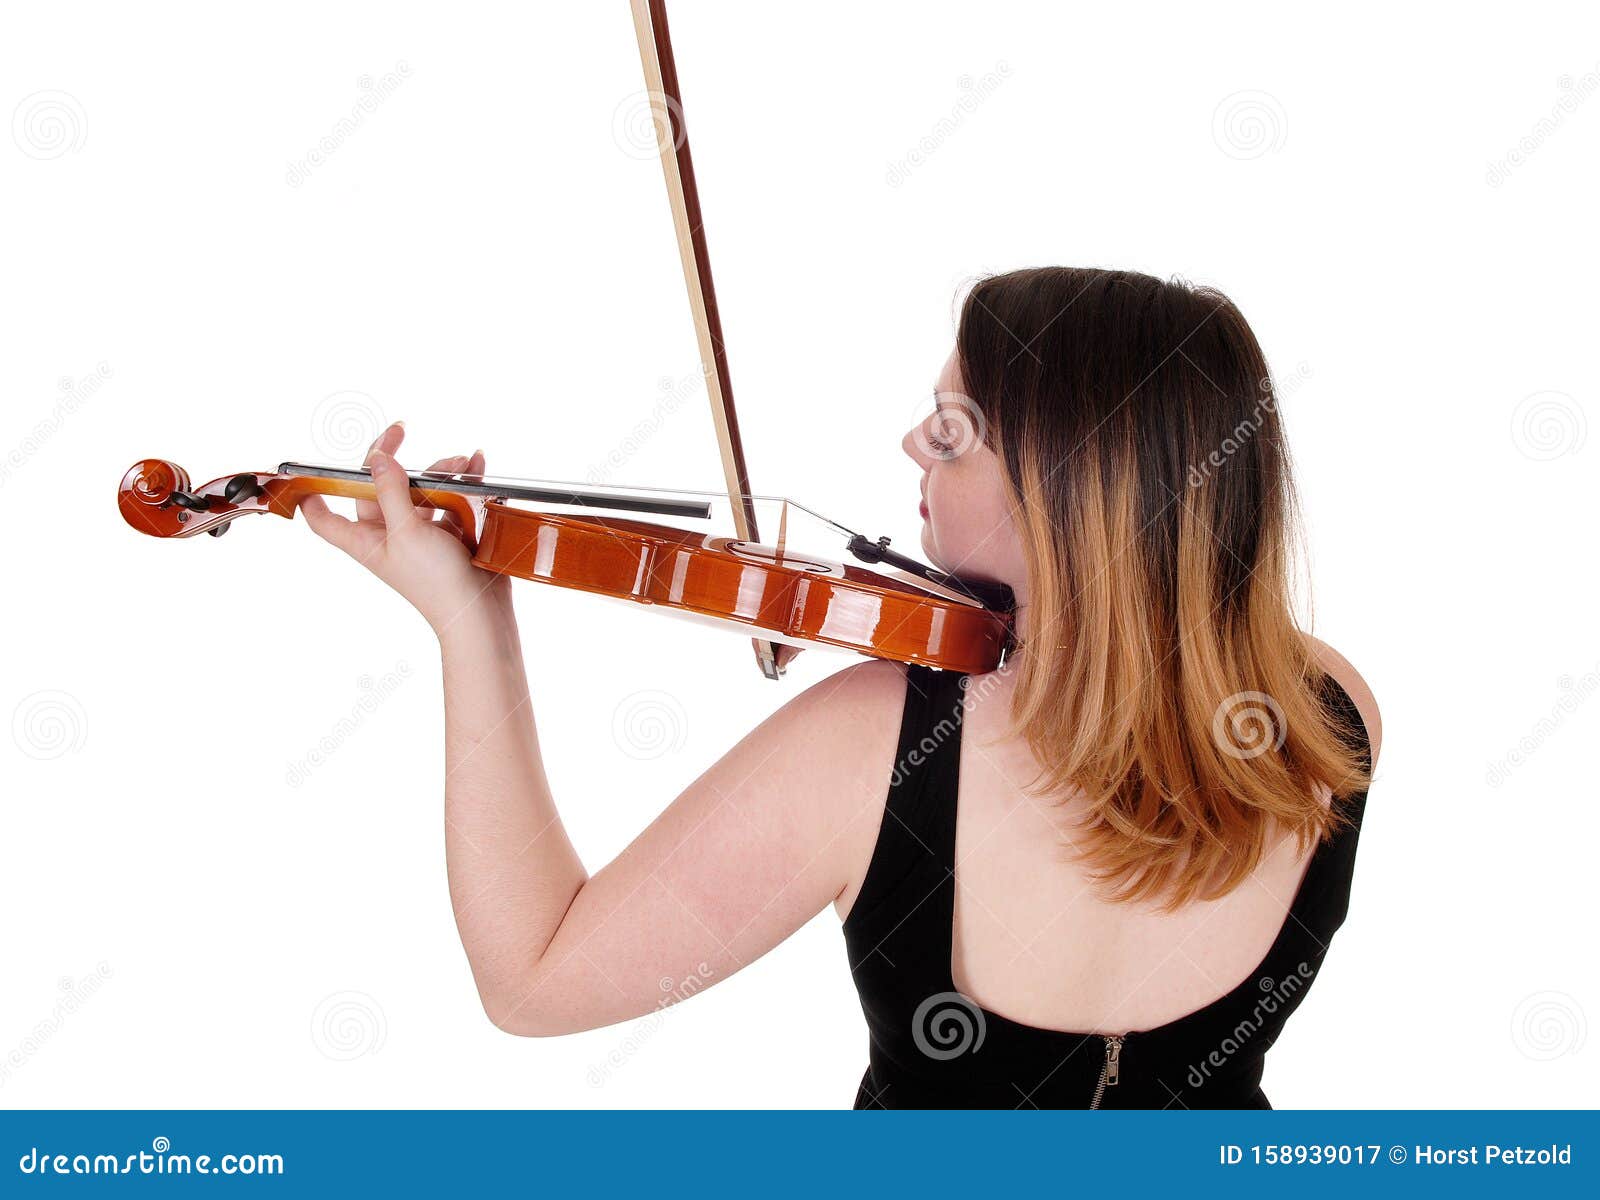 Woman the Violin Close Up the Back Stock Image of performer, musician: 158939017